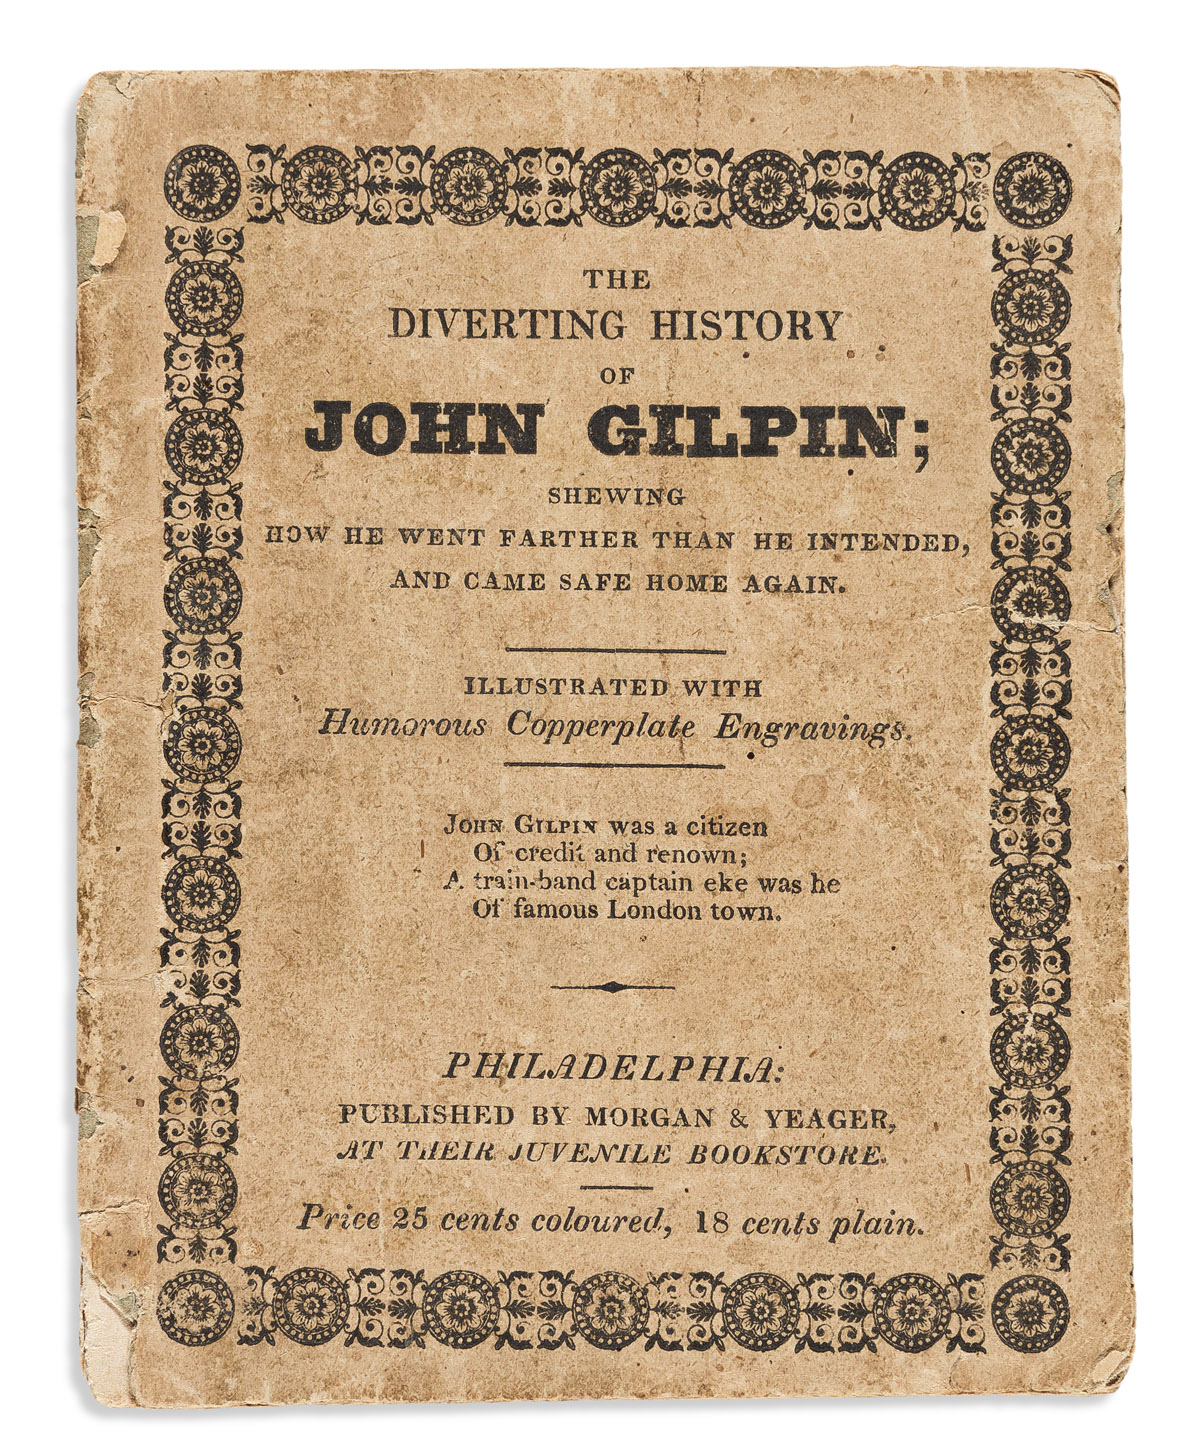 (CHILDRENS BOOKS.) [William Cowper.] The Diverting History of John Gilpin.